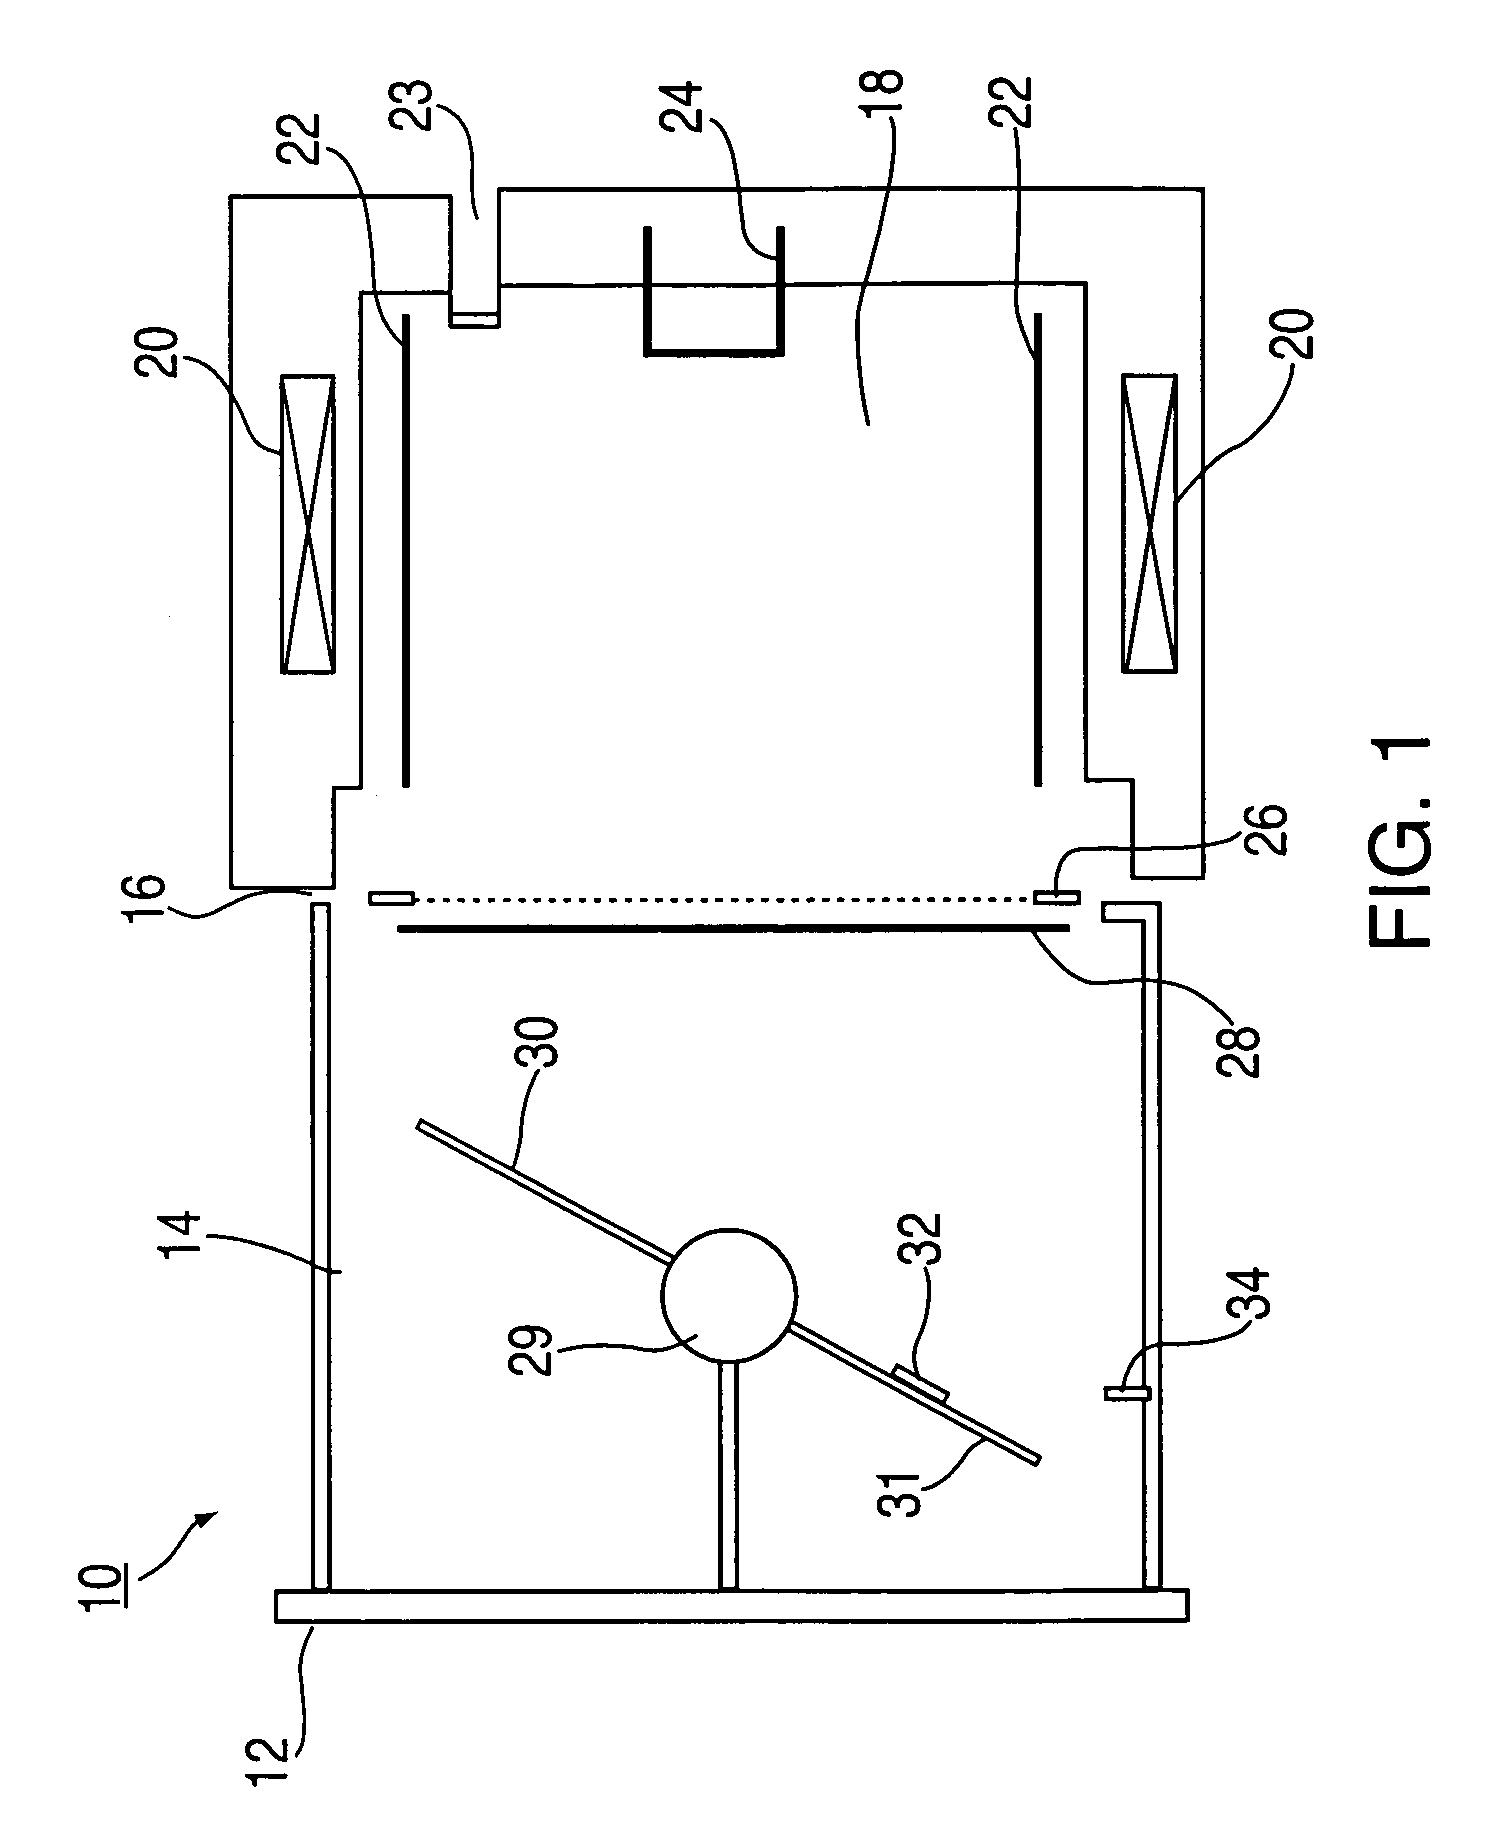 In-situ wear indicator for non-selective material removal systems